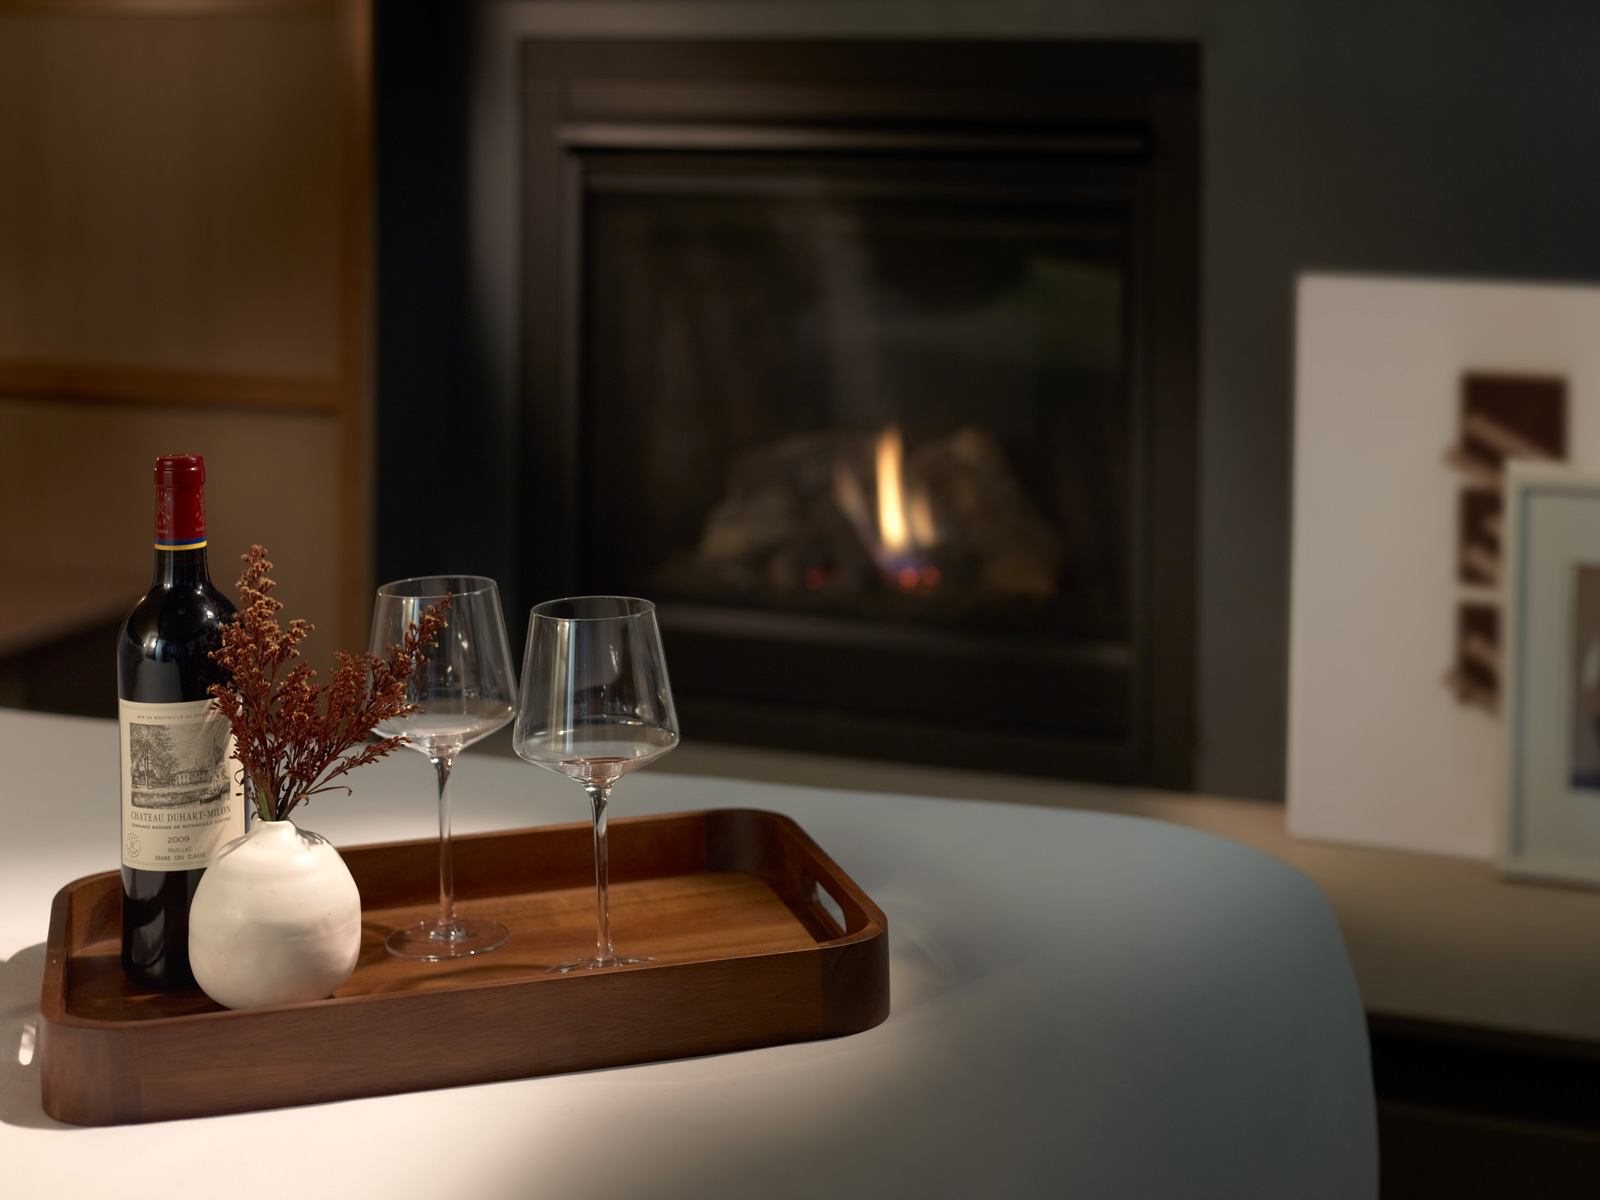 Tray with wine and wineglasses on the bed with a fireplace in the background